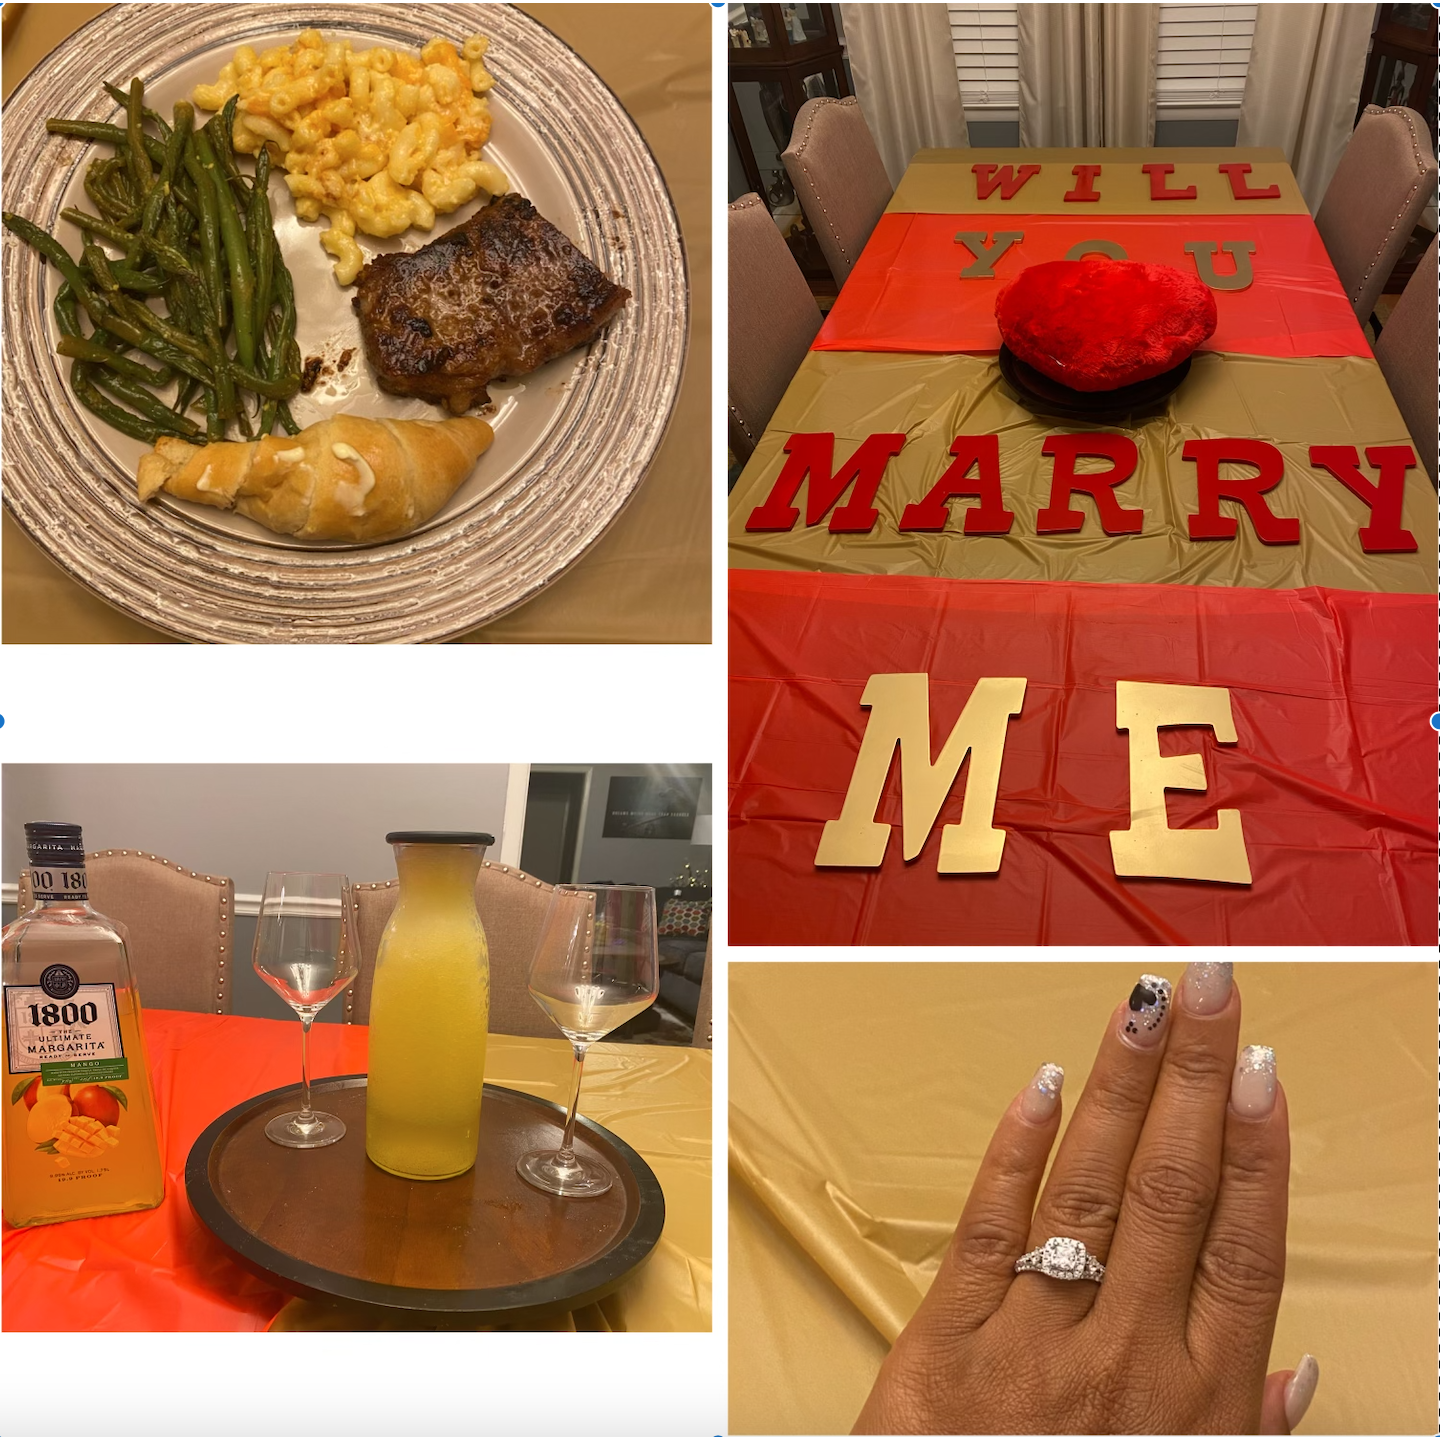 The meal and presentation that was given before "I said YES!"